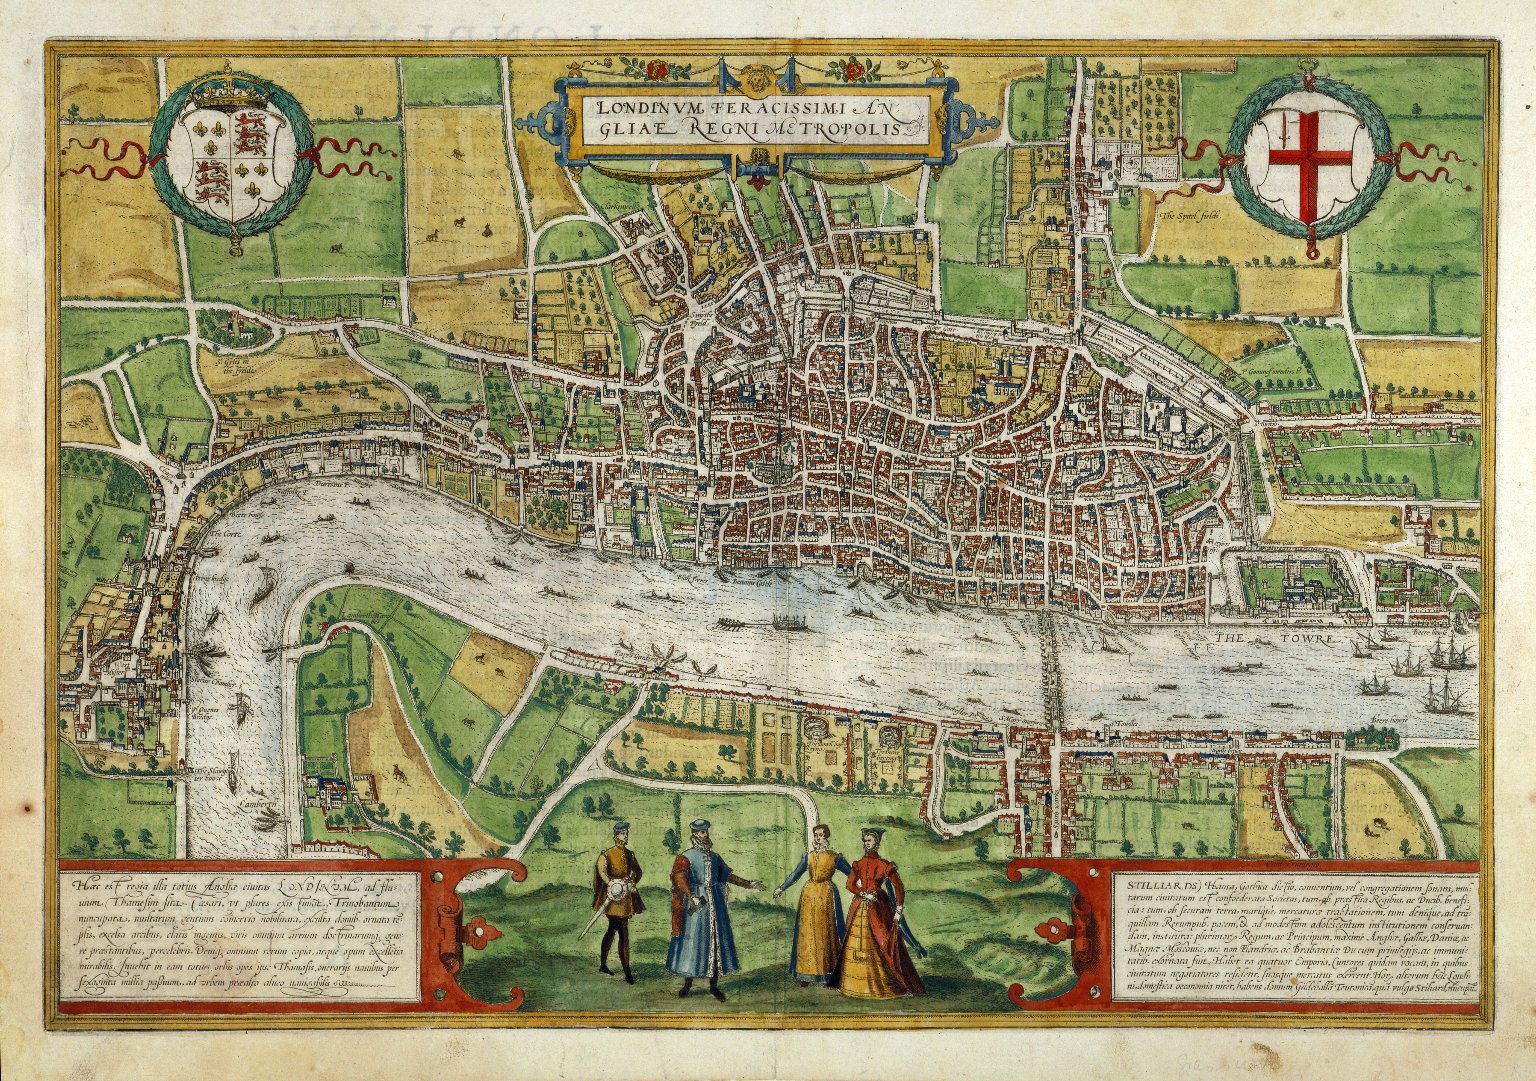 Hand-coloured map of London cut from 1635 edition of Georg Braun and Franz Hogenberg, Civitatis Orbis Terrarum.  MAP L85c no.27 (Digital Image File 3371). Used by permission of the Folger Shakespeare Library under a CC BY-SA 4.0 license. For better image resolution, view the image in LUNA.